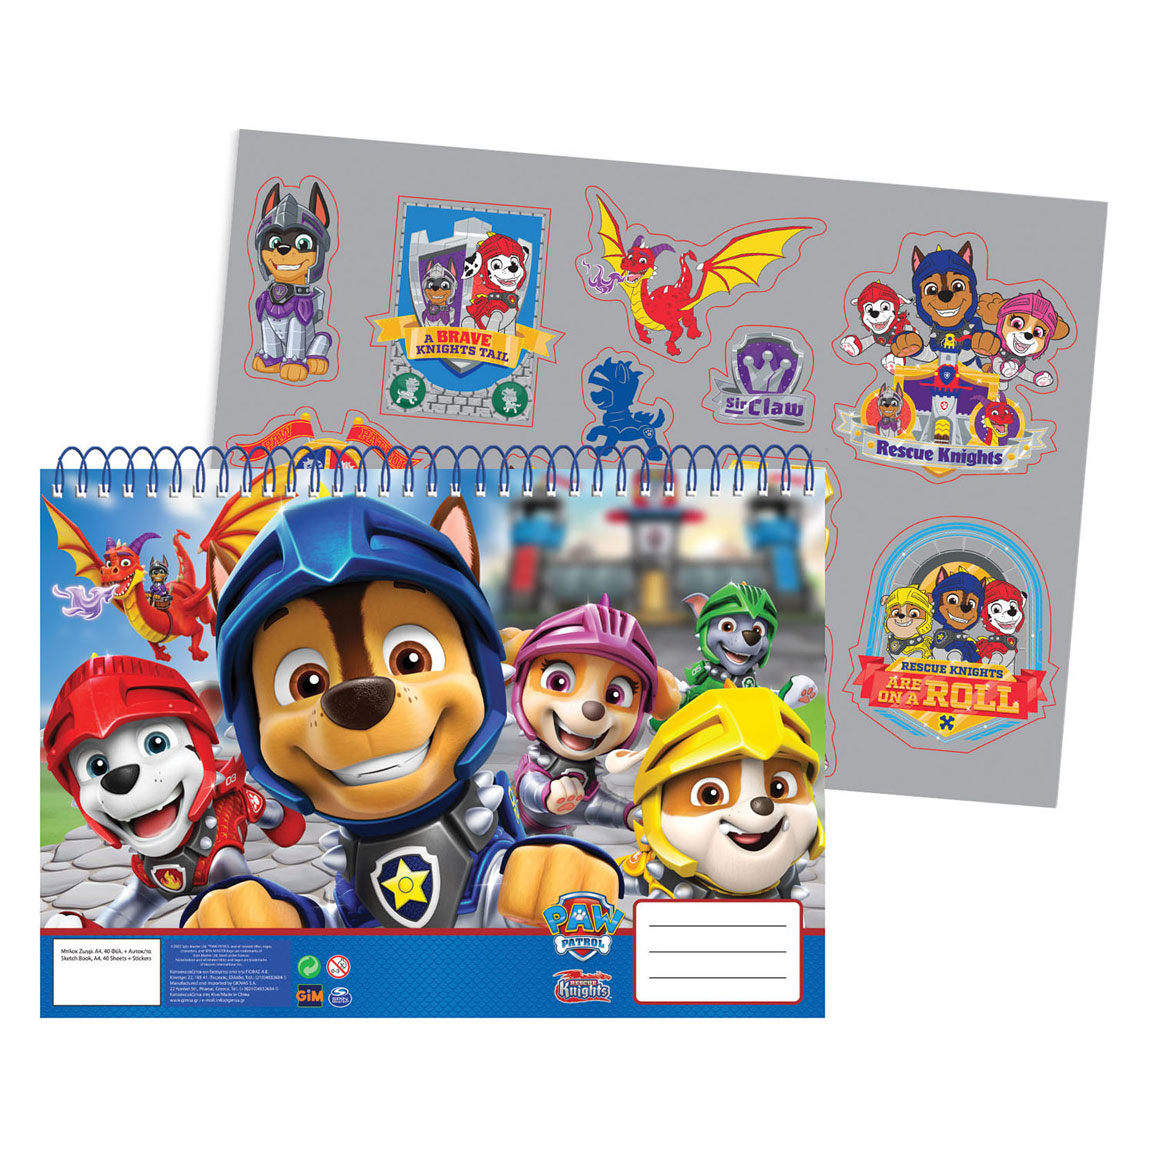 Buy Nick Shop Paw Patrol Magnetic Drawing Board Bundle ~ Nick Paw Patrol  Toys for Boys and Girls Featuring Chase | Paw Patrol Drawing Board with  Stickers (Paw Patrol Party Favors Shop)